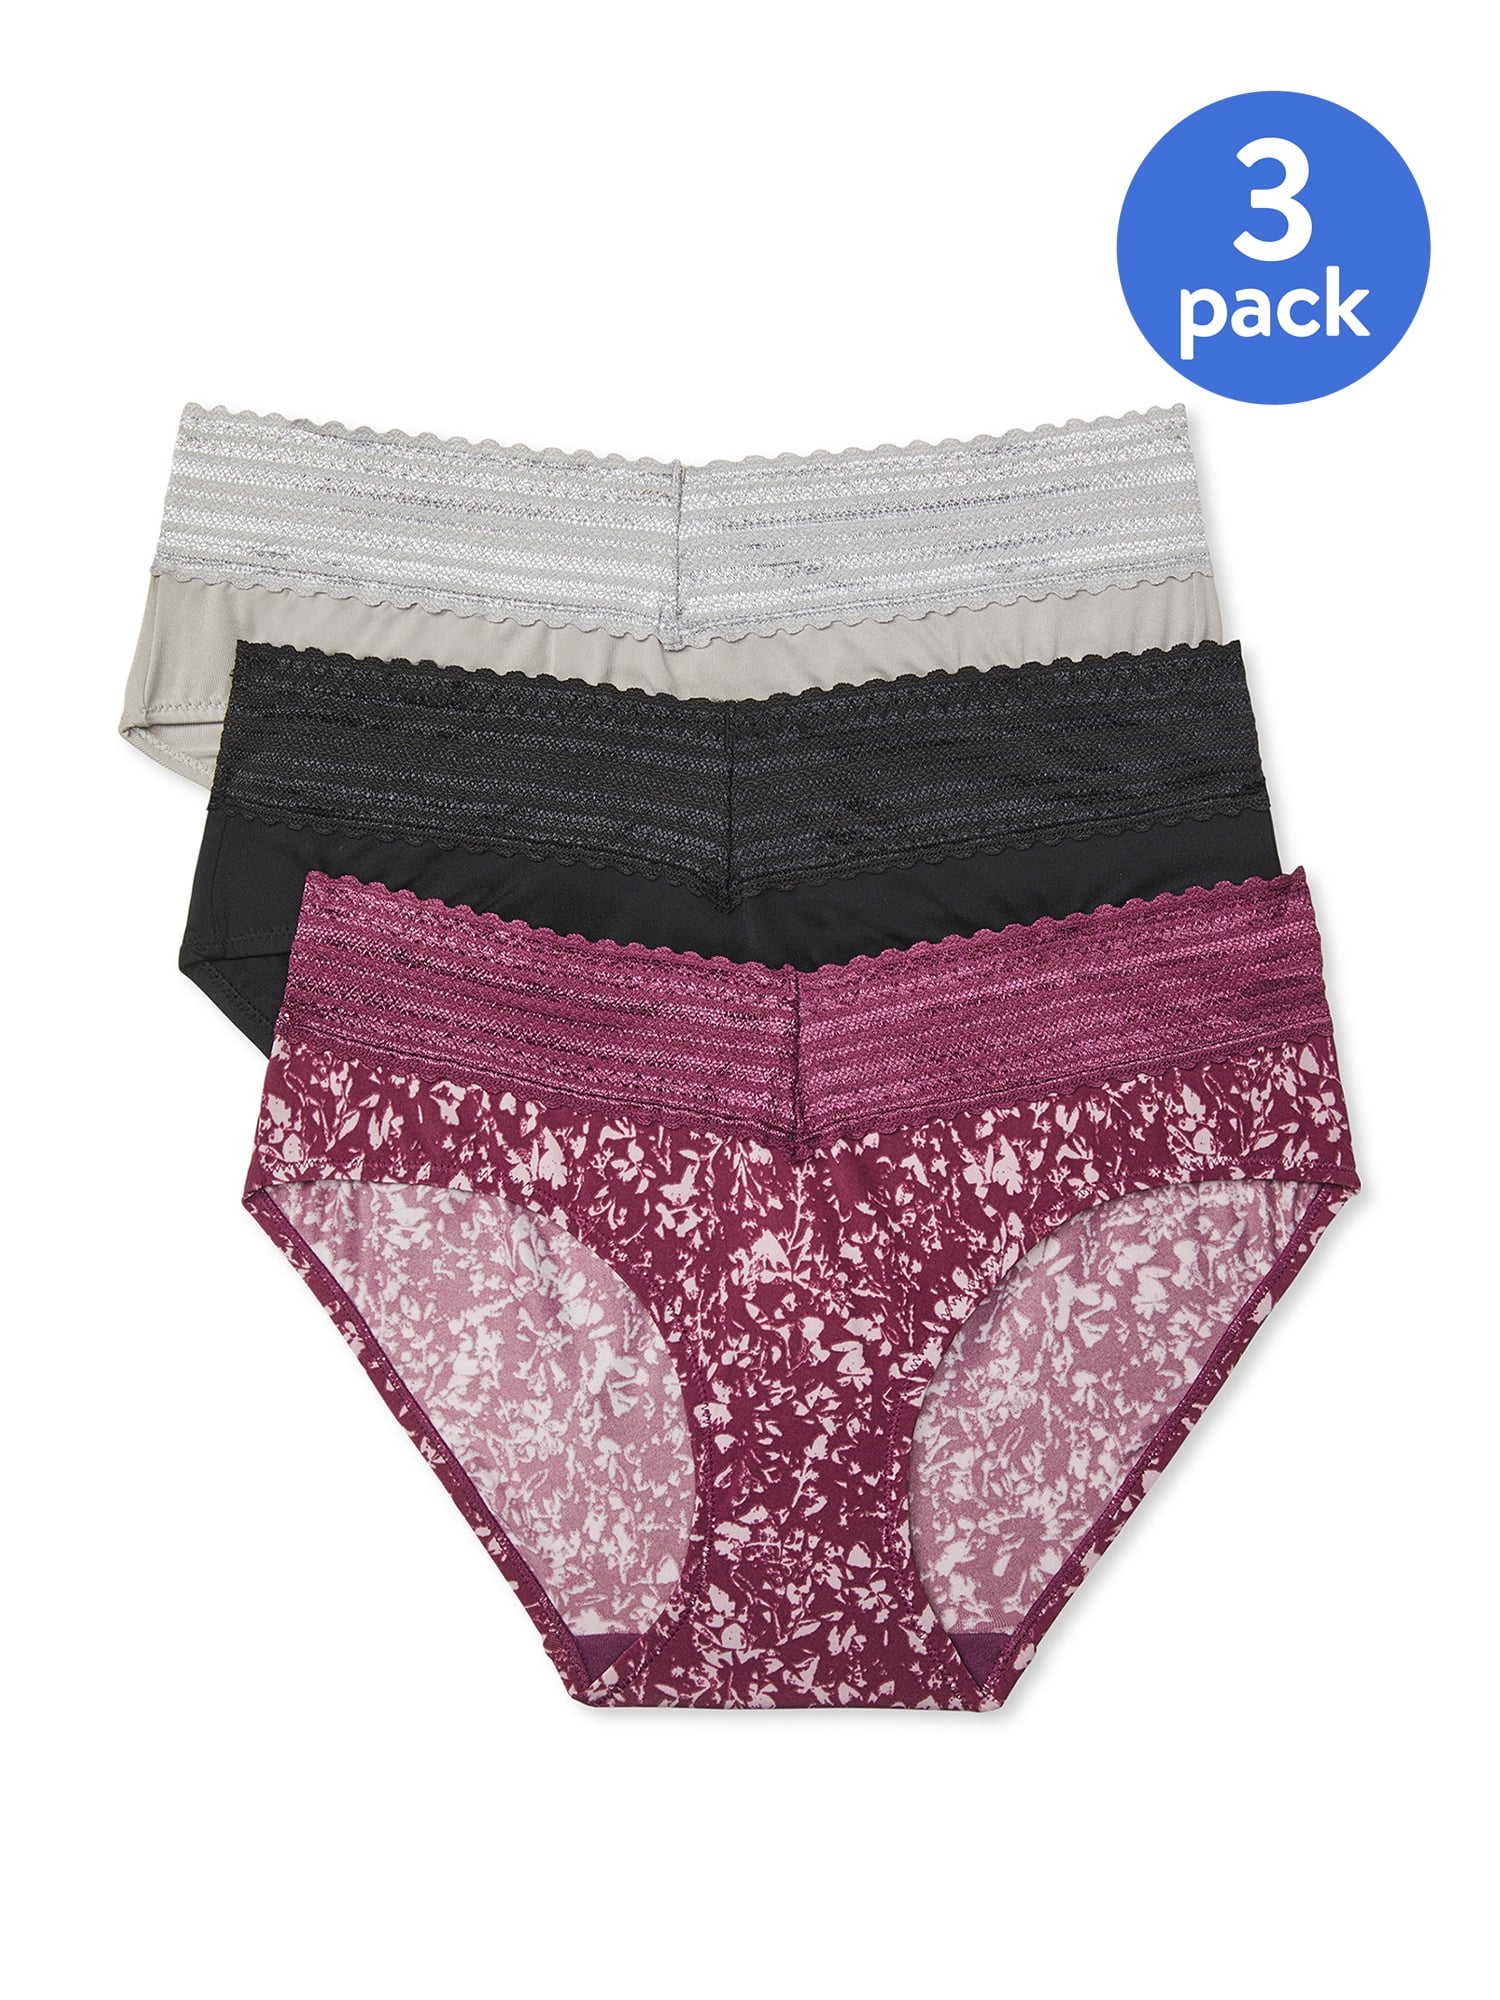 Warners Womens Blissful Benefits No Muffin 3 Pack Hipster Panties